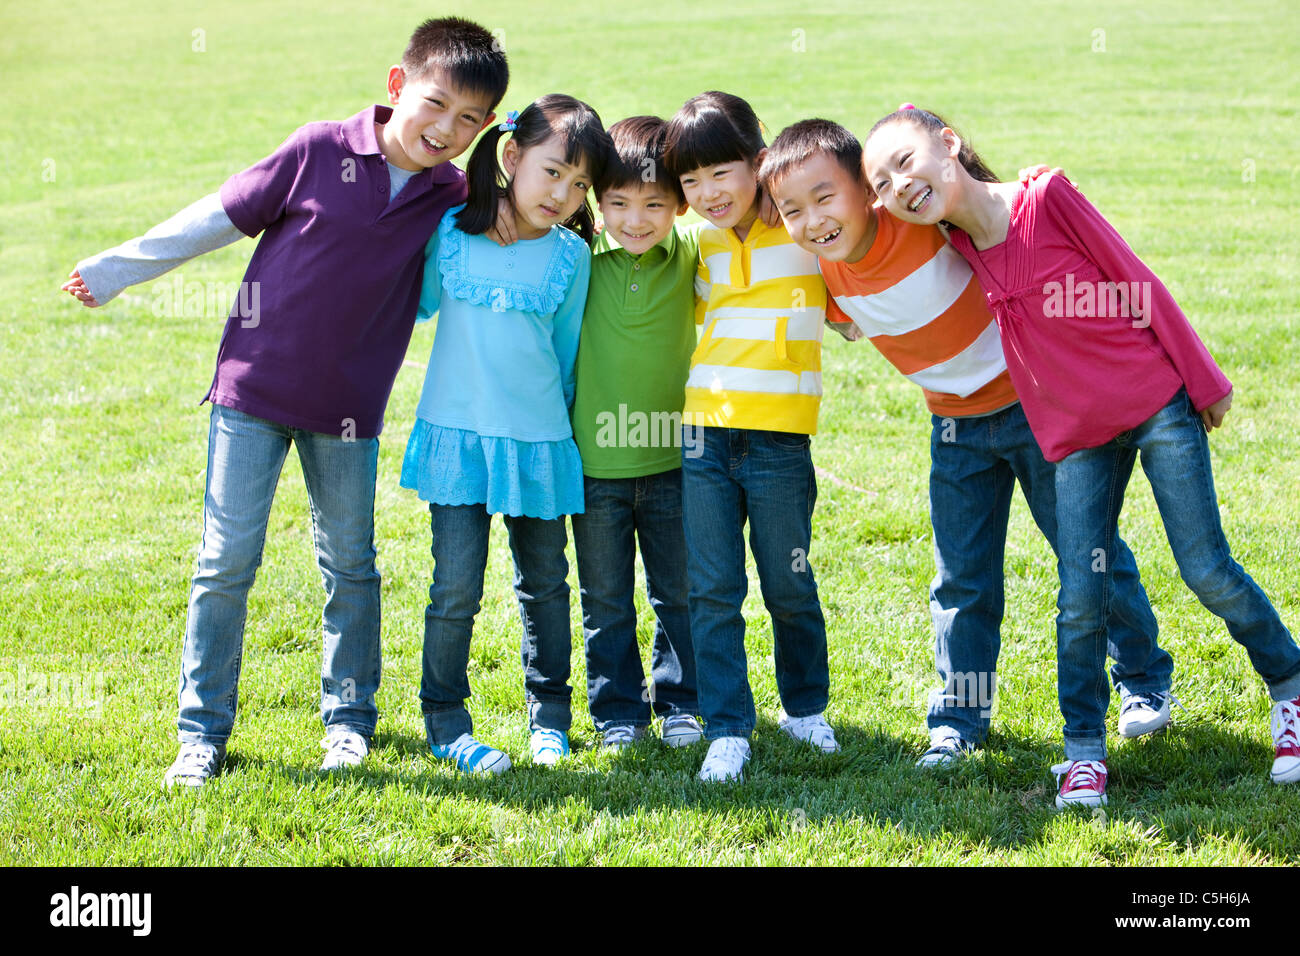 Children Posing for Picture at Park Stock Photo